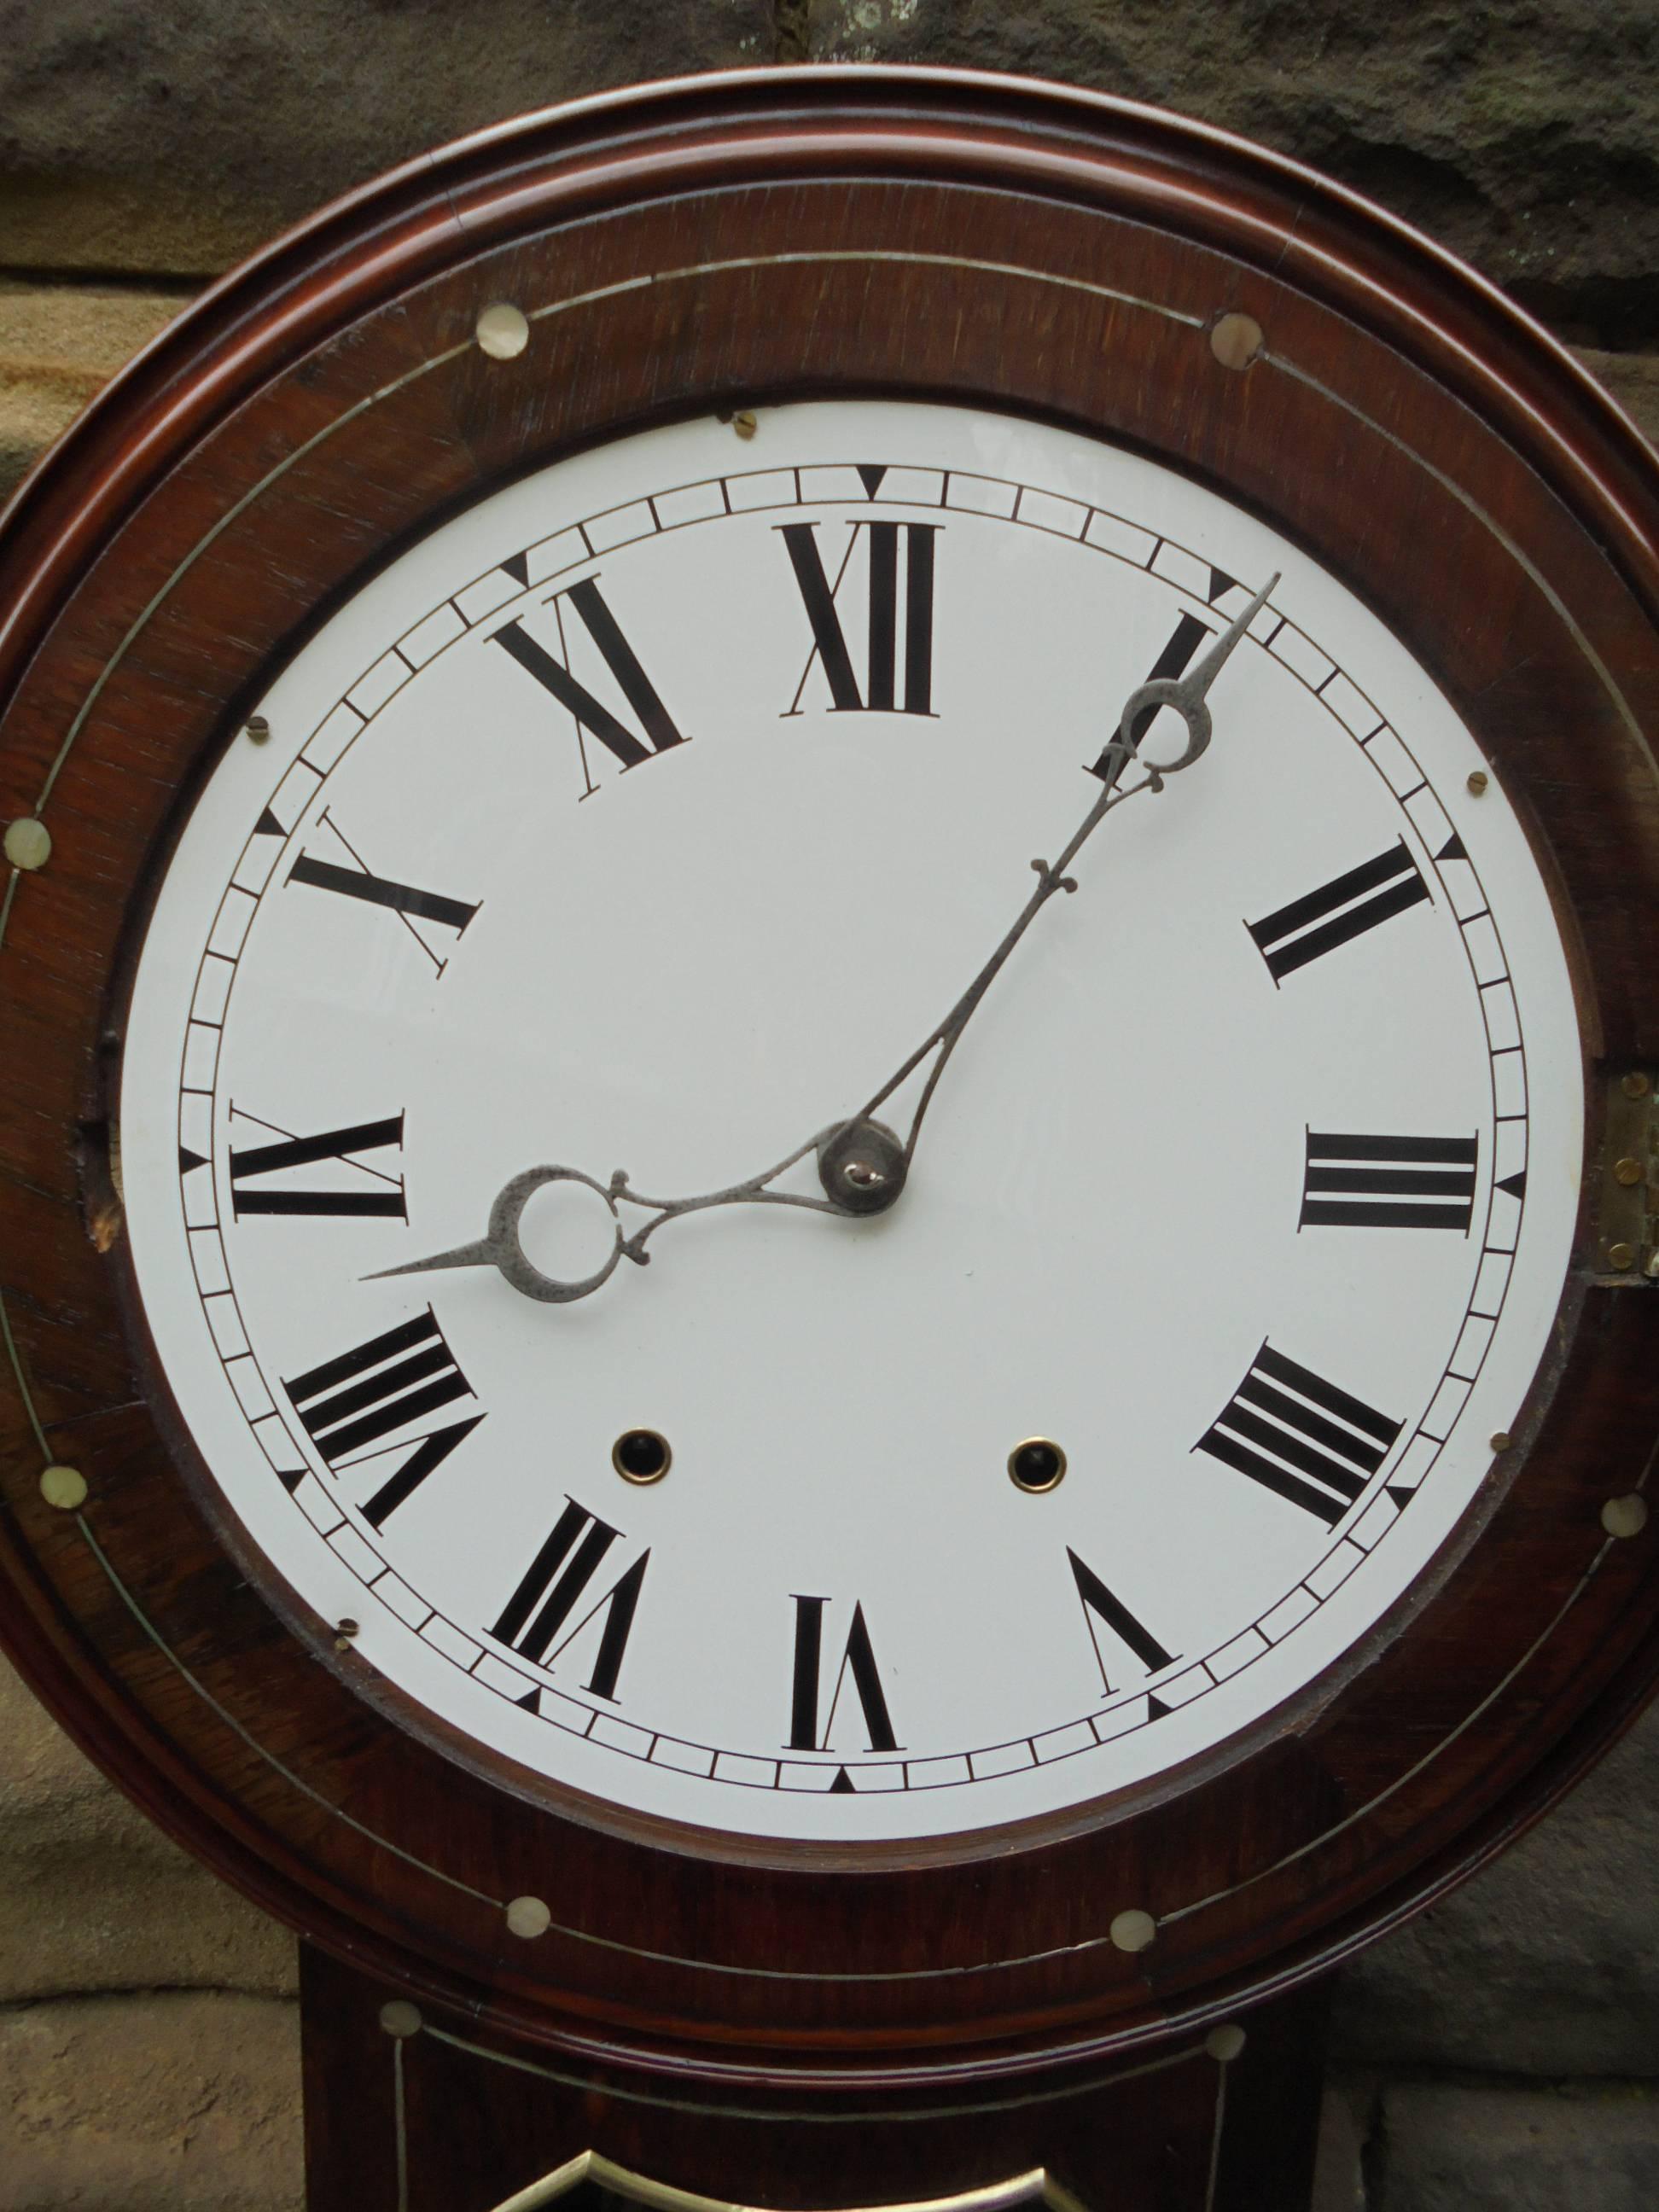 Great Britain (UK) Antique Inlaid Rosewood Drop Dial Wall Clock For Sale